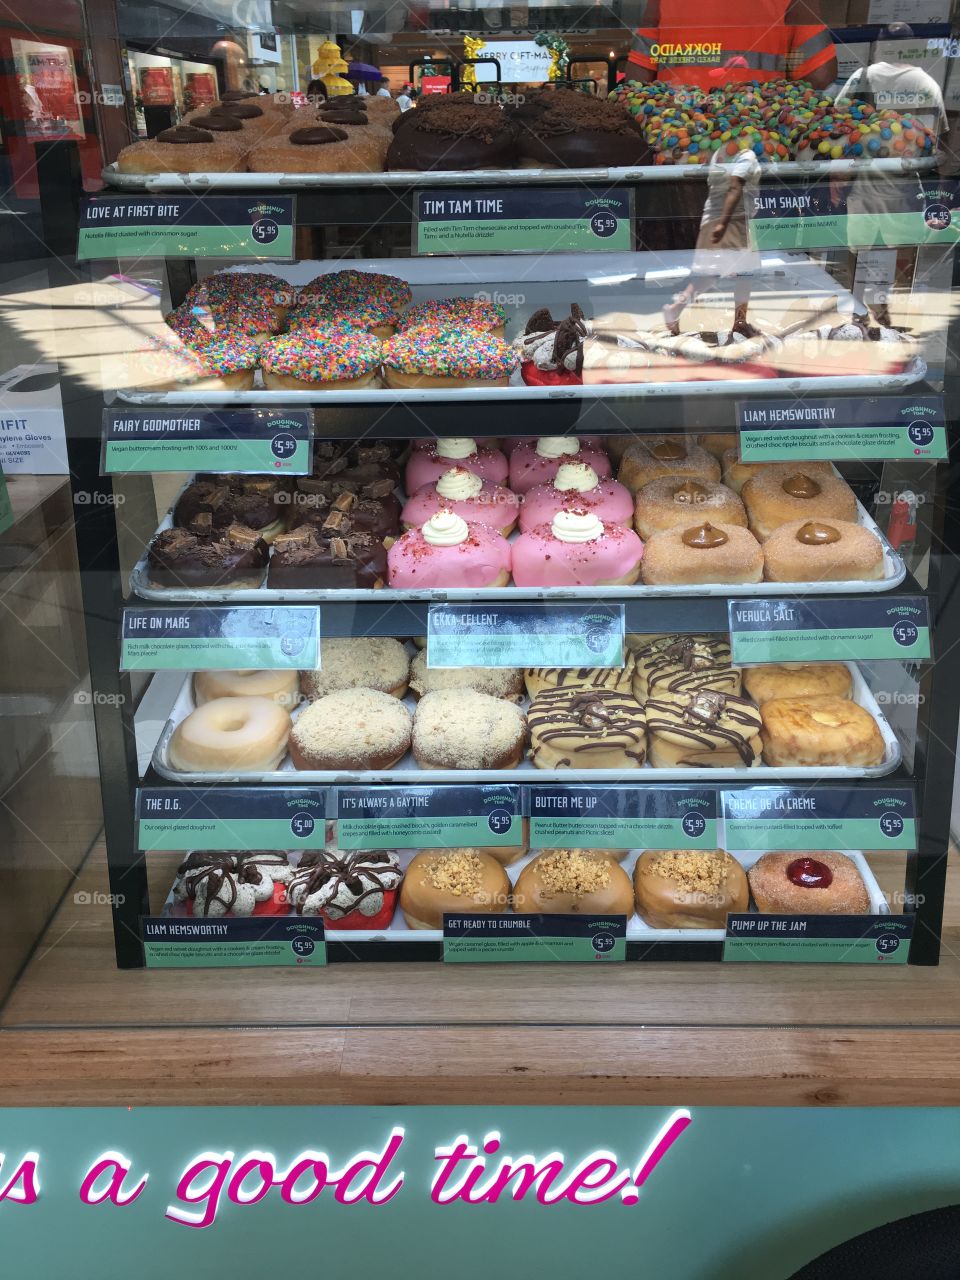 Can I please have every donut that’s in this window?Who’s ready for Donut Time? (c)